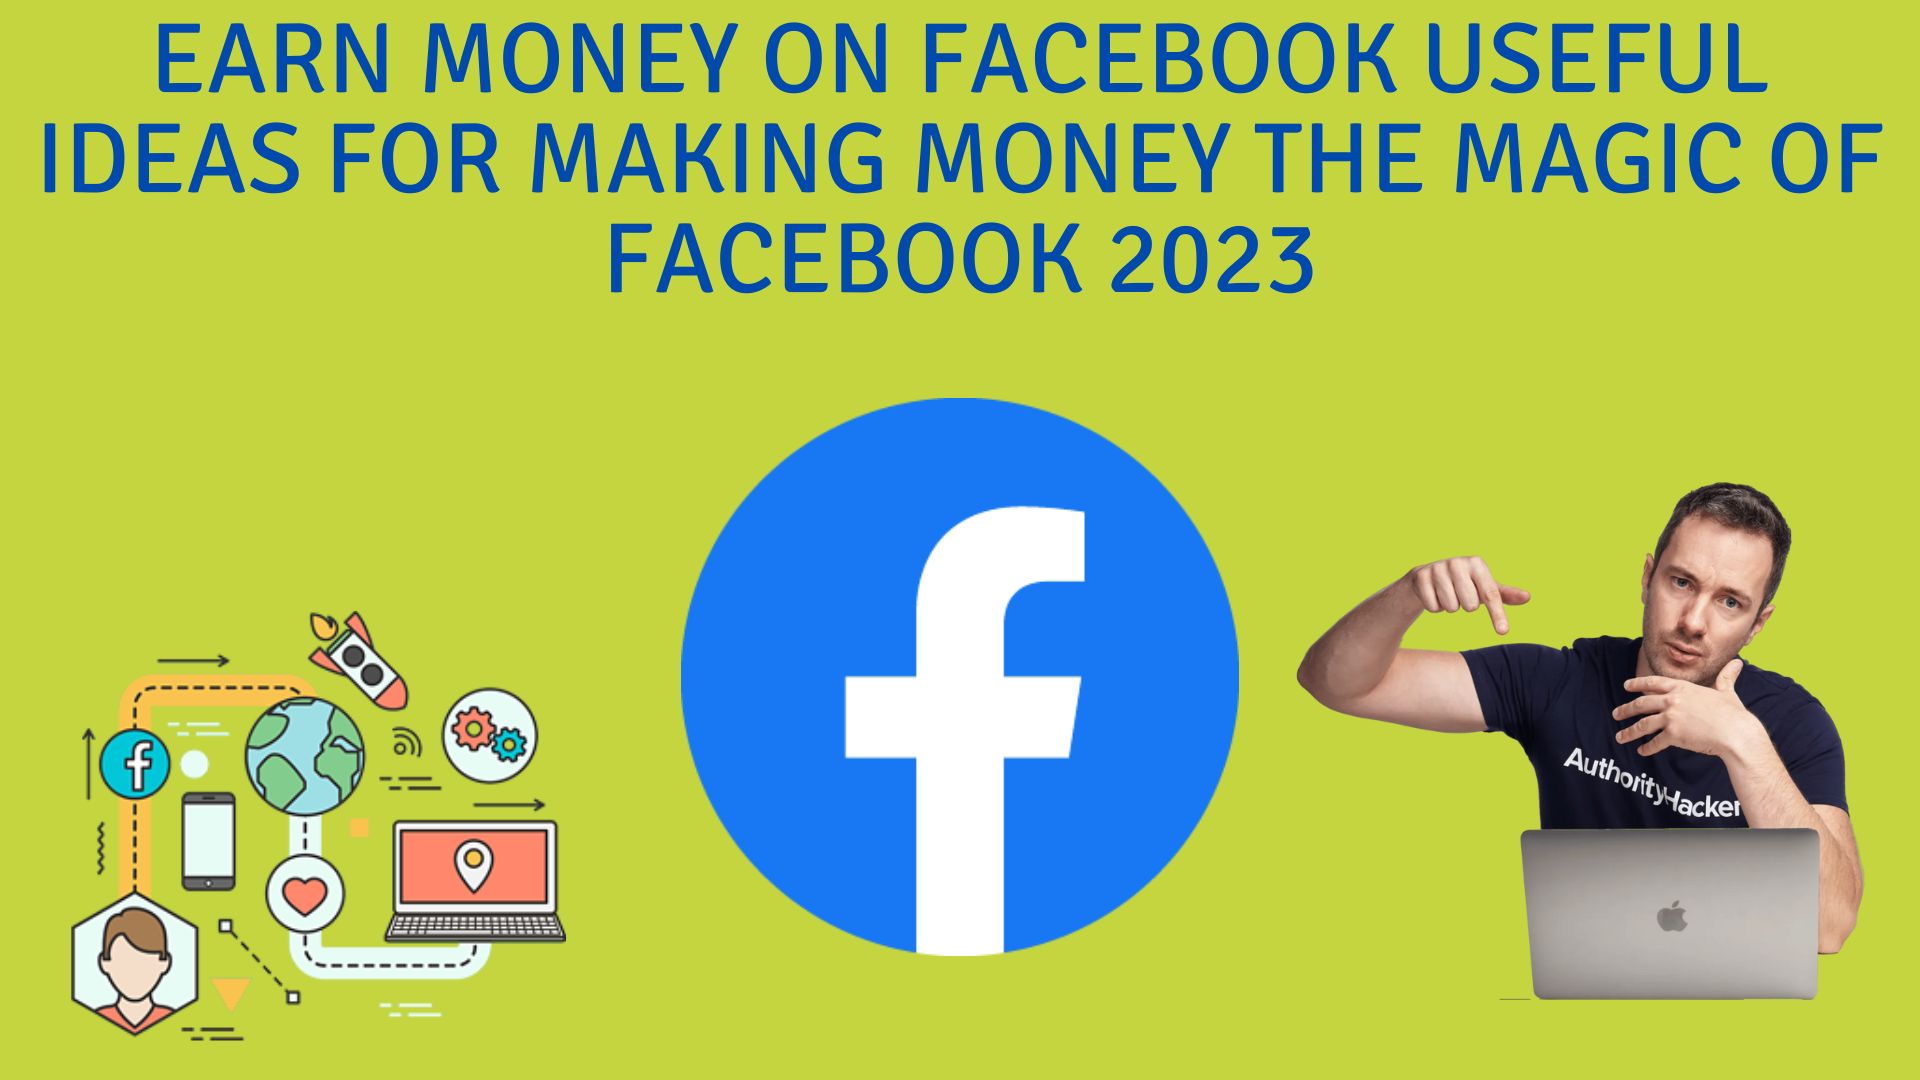 Earn money on facebook useful ideas for making money the magic of facebook 2023